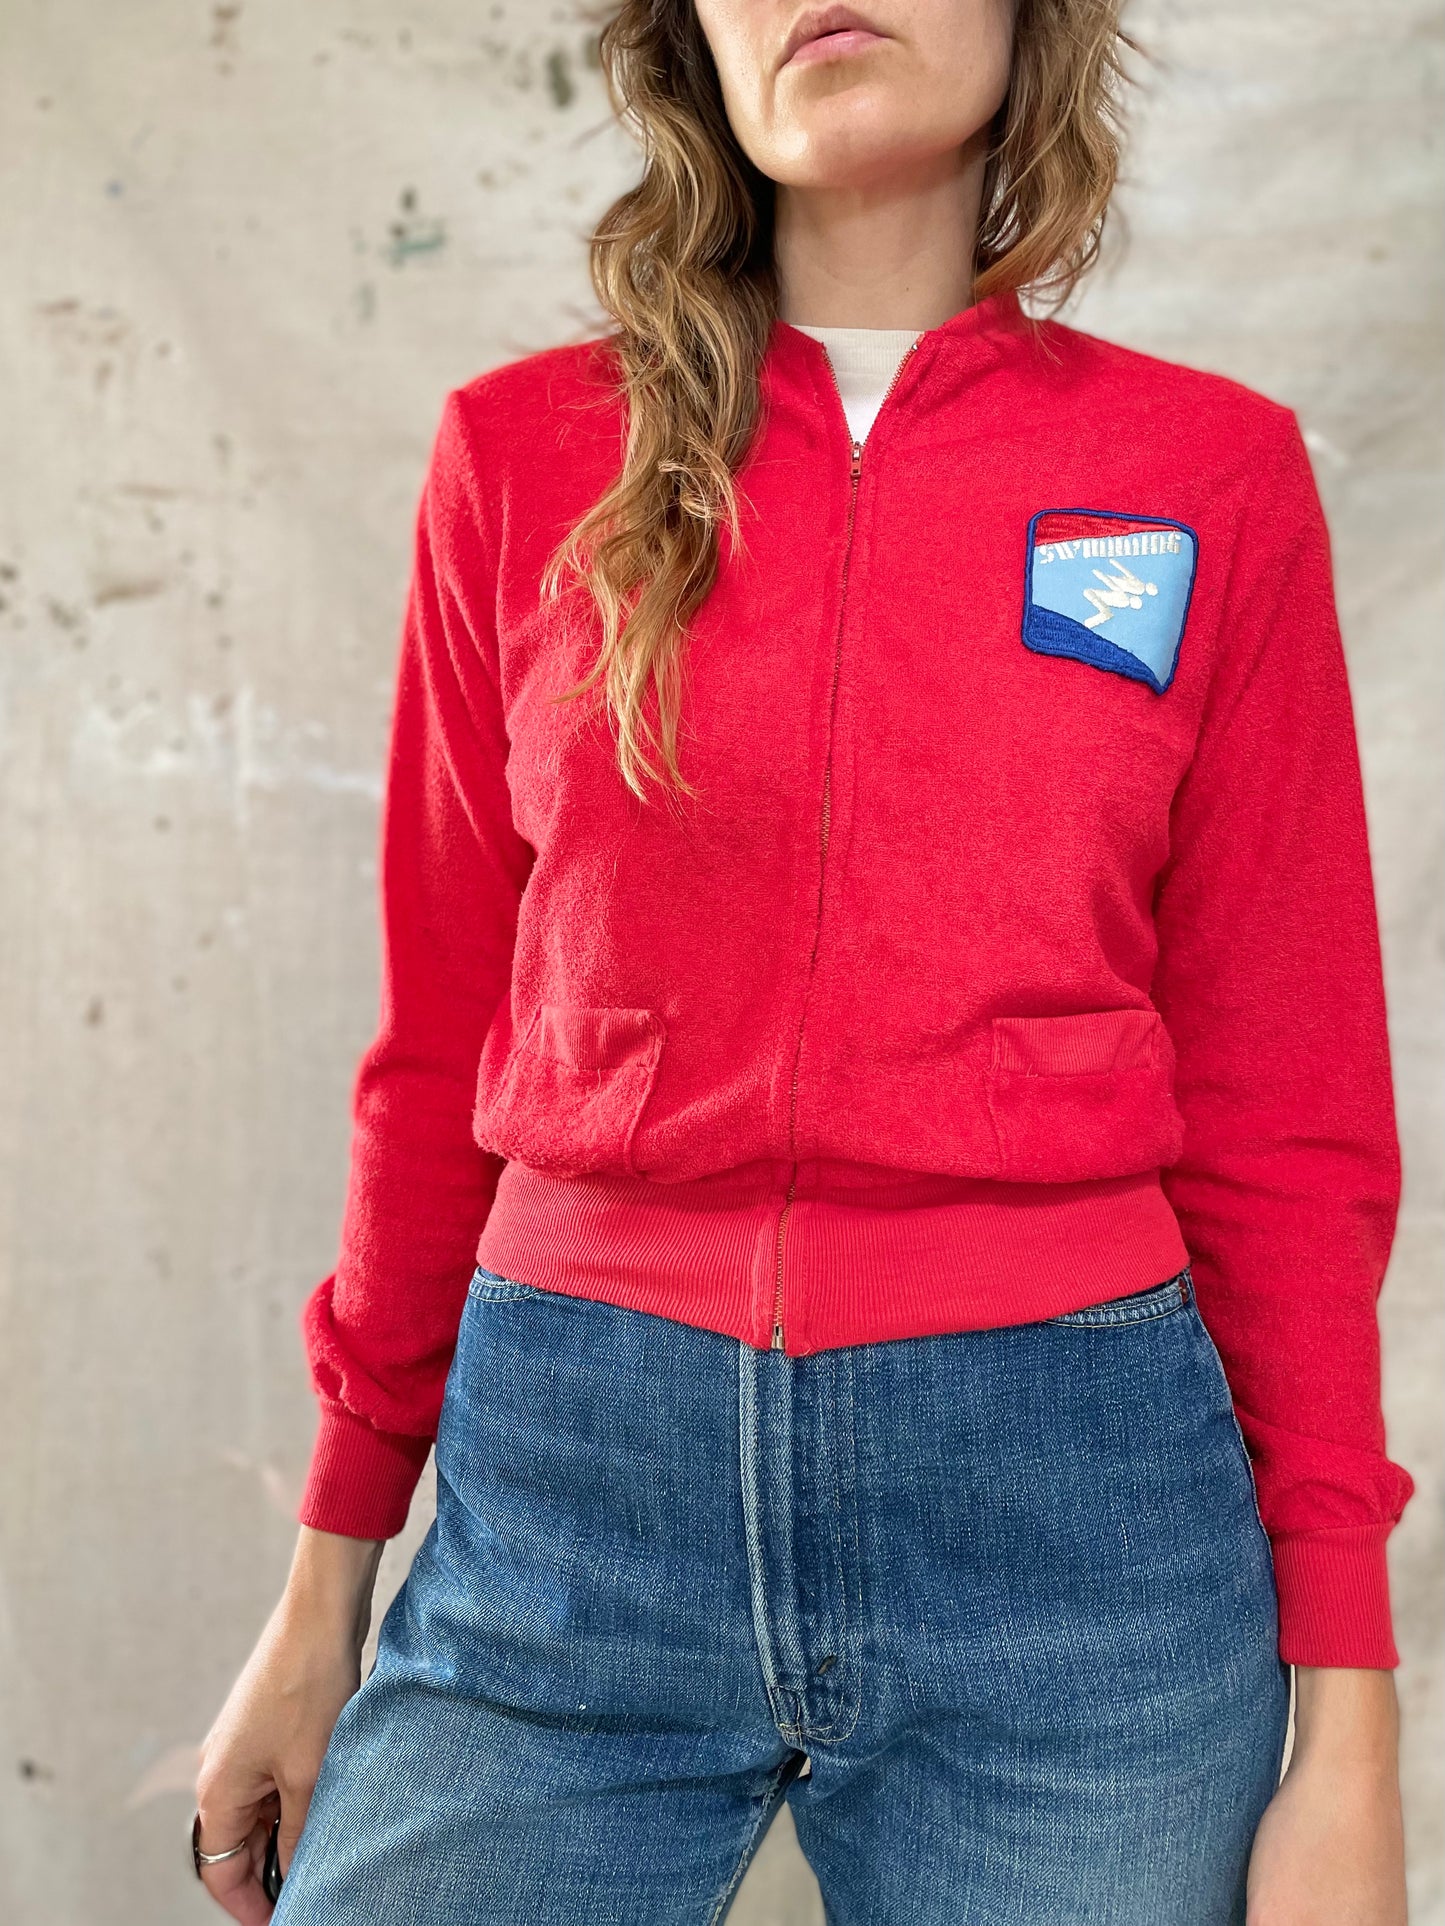 70s Terry Cloth Lifeguard Swimmer Jacket